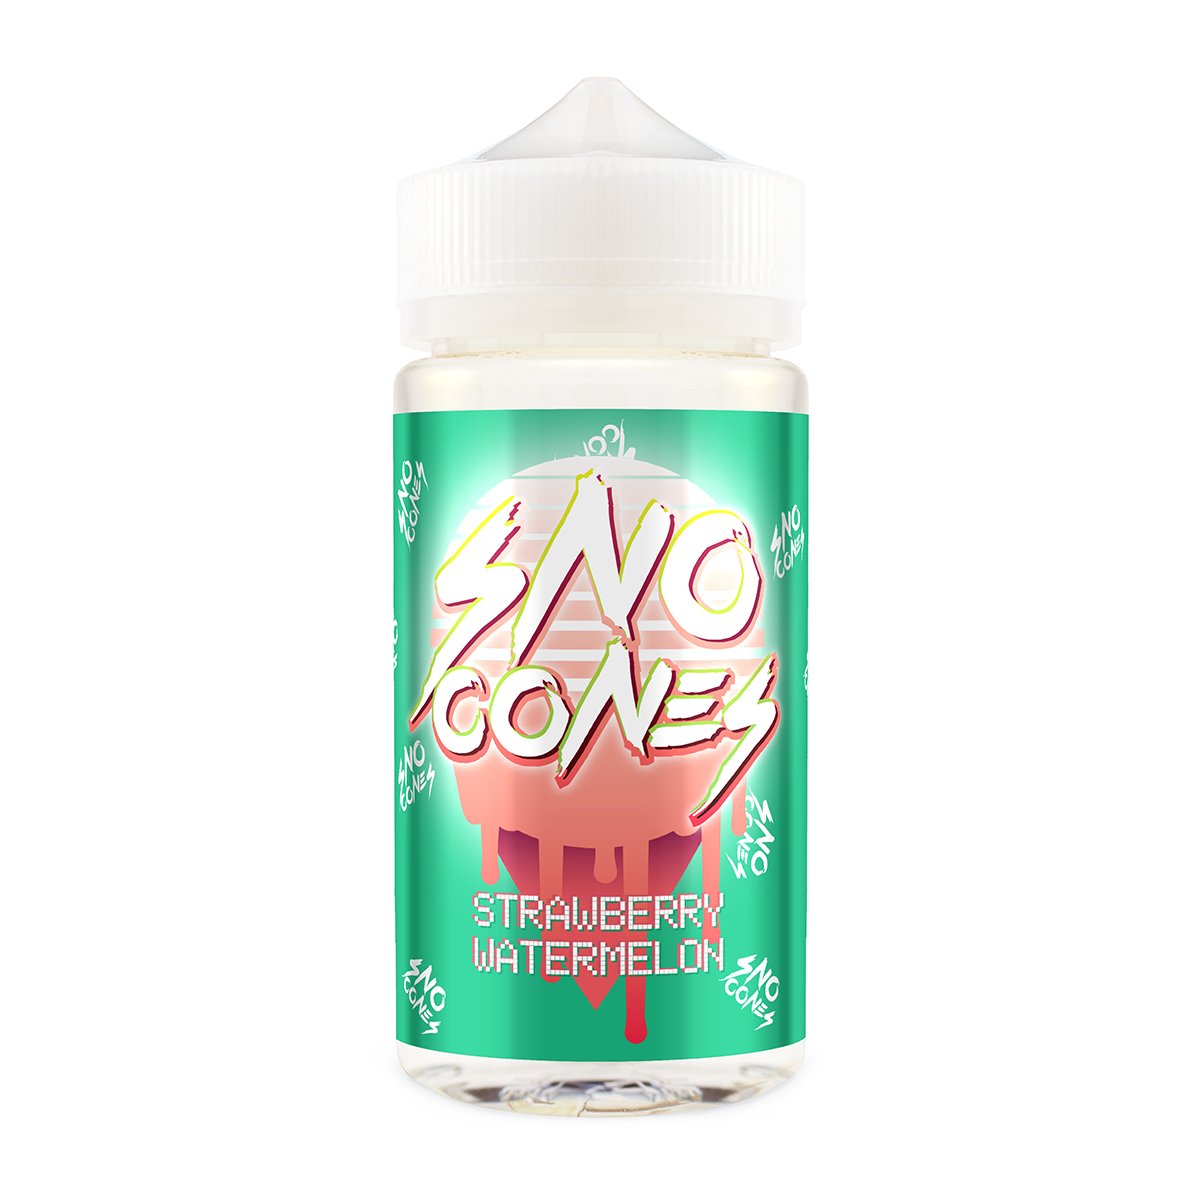 Sno Cones - Strawberry Watermelon 80ml - The Ace Of Vapez